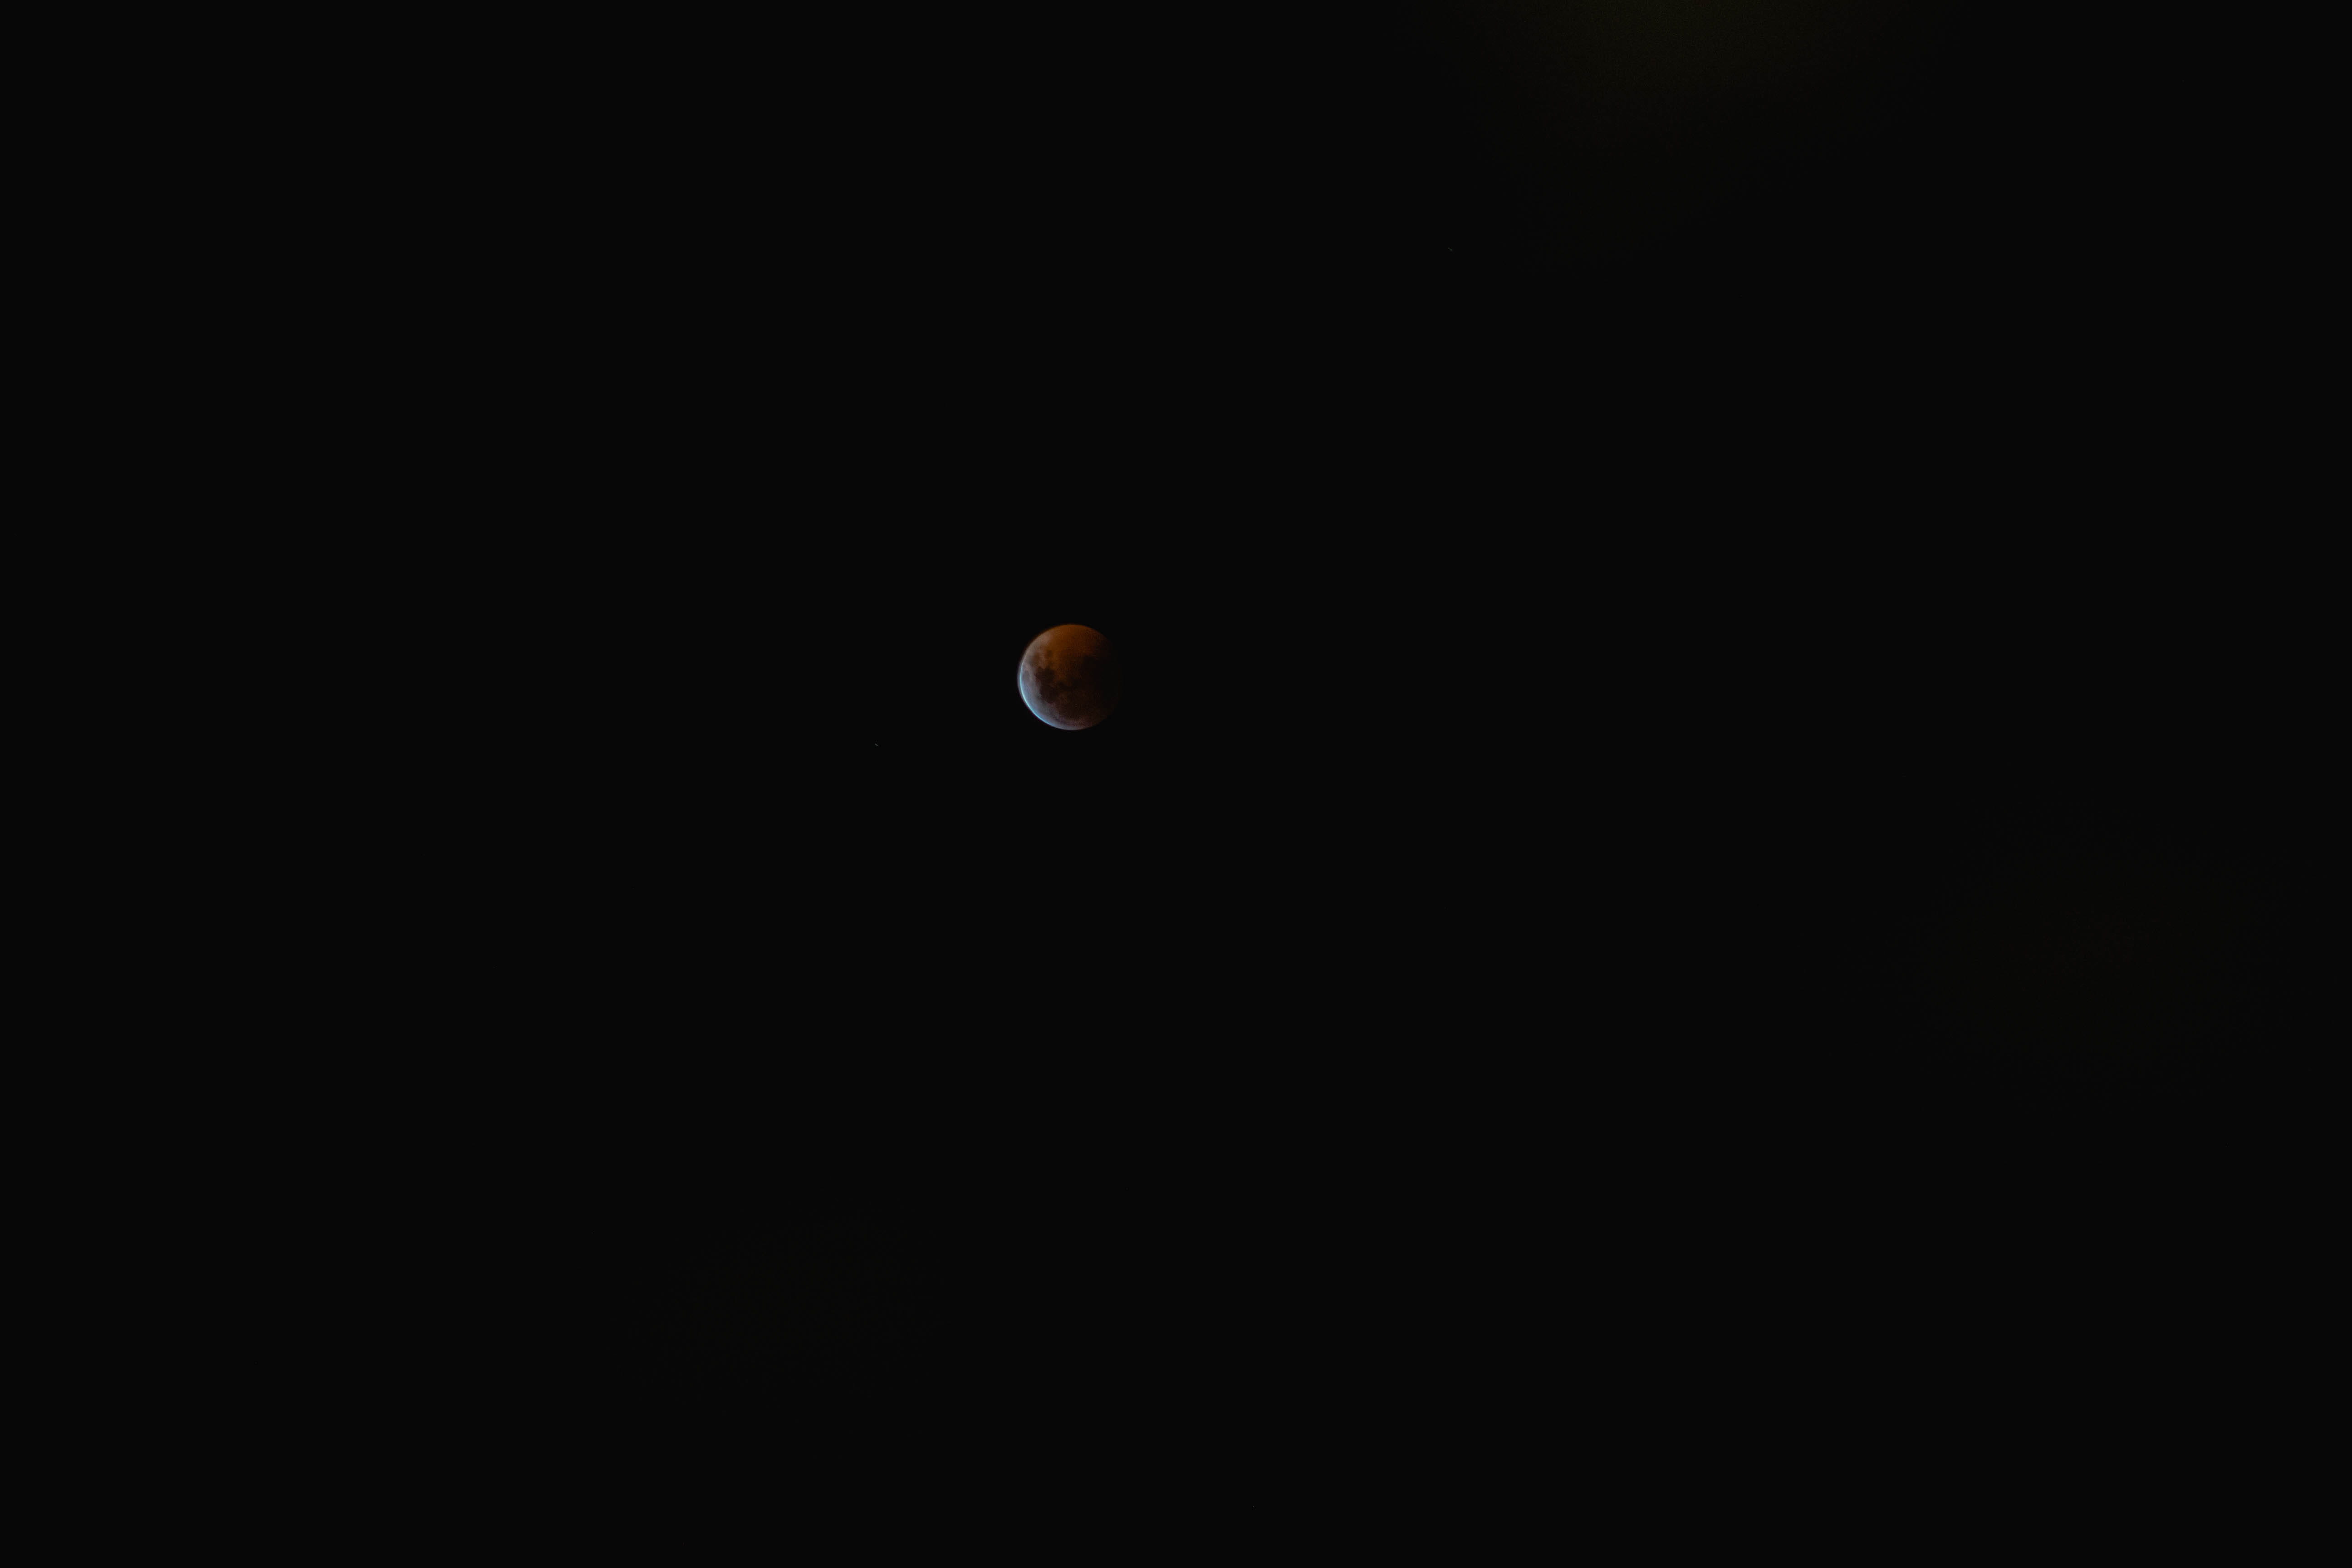 photo of moon from afar, nature, night, eclipse, lunar eclipse